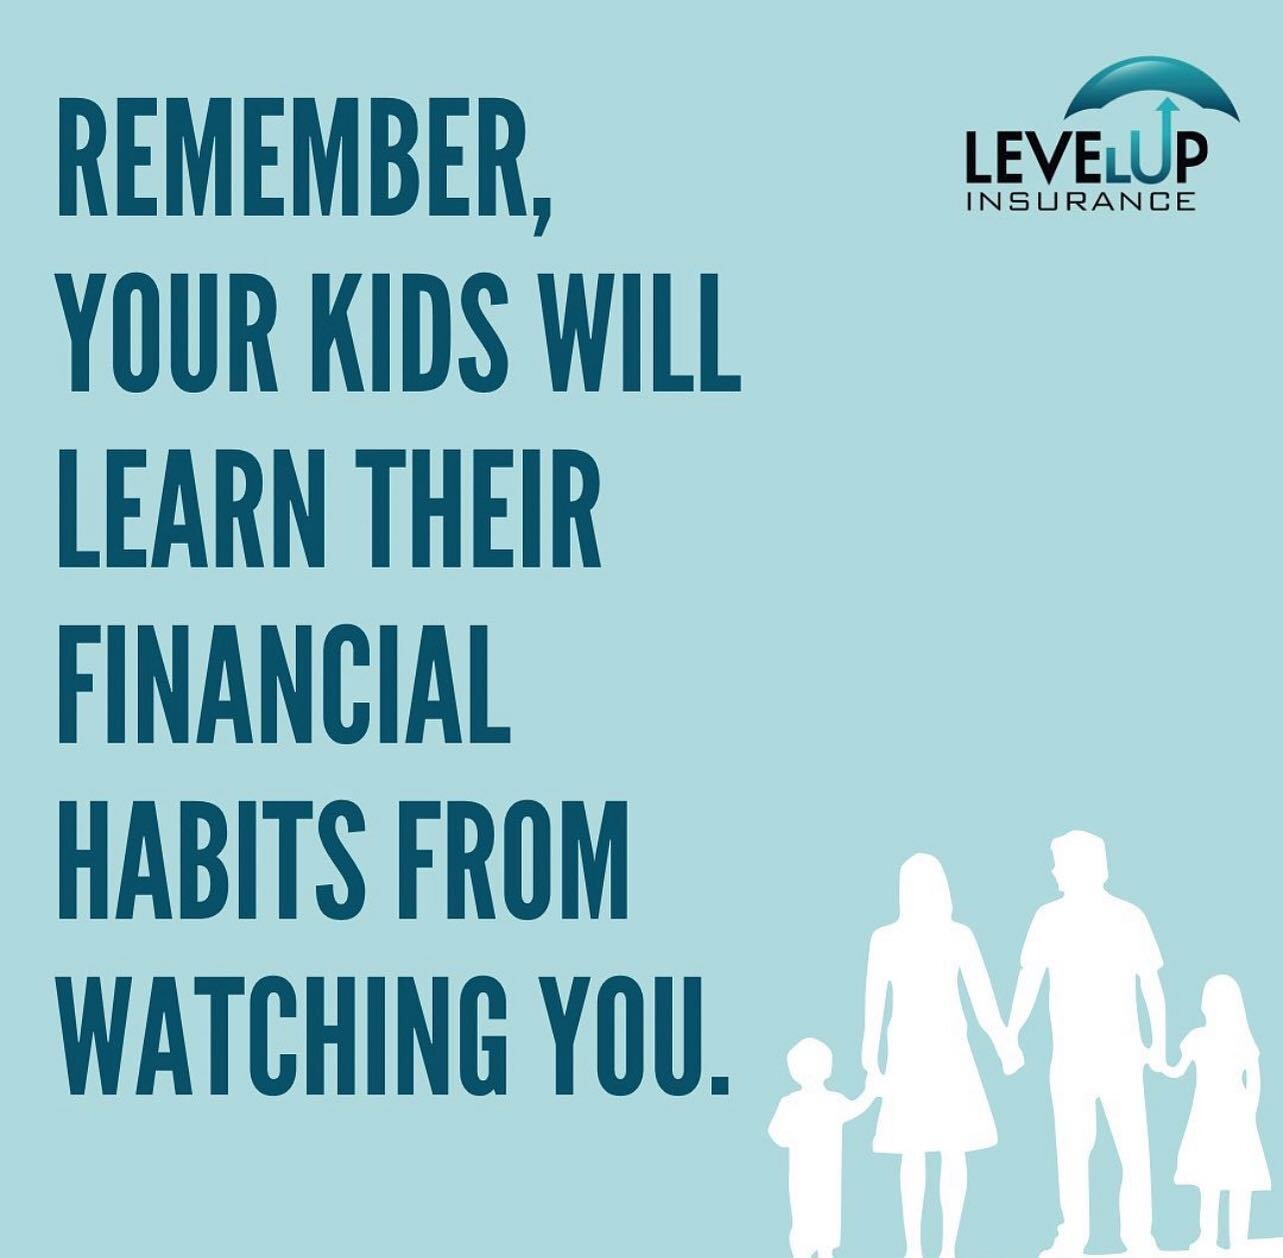 Show your kids the importance of being prepared for the future by adding life insurance to your financial plan.